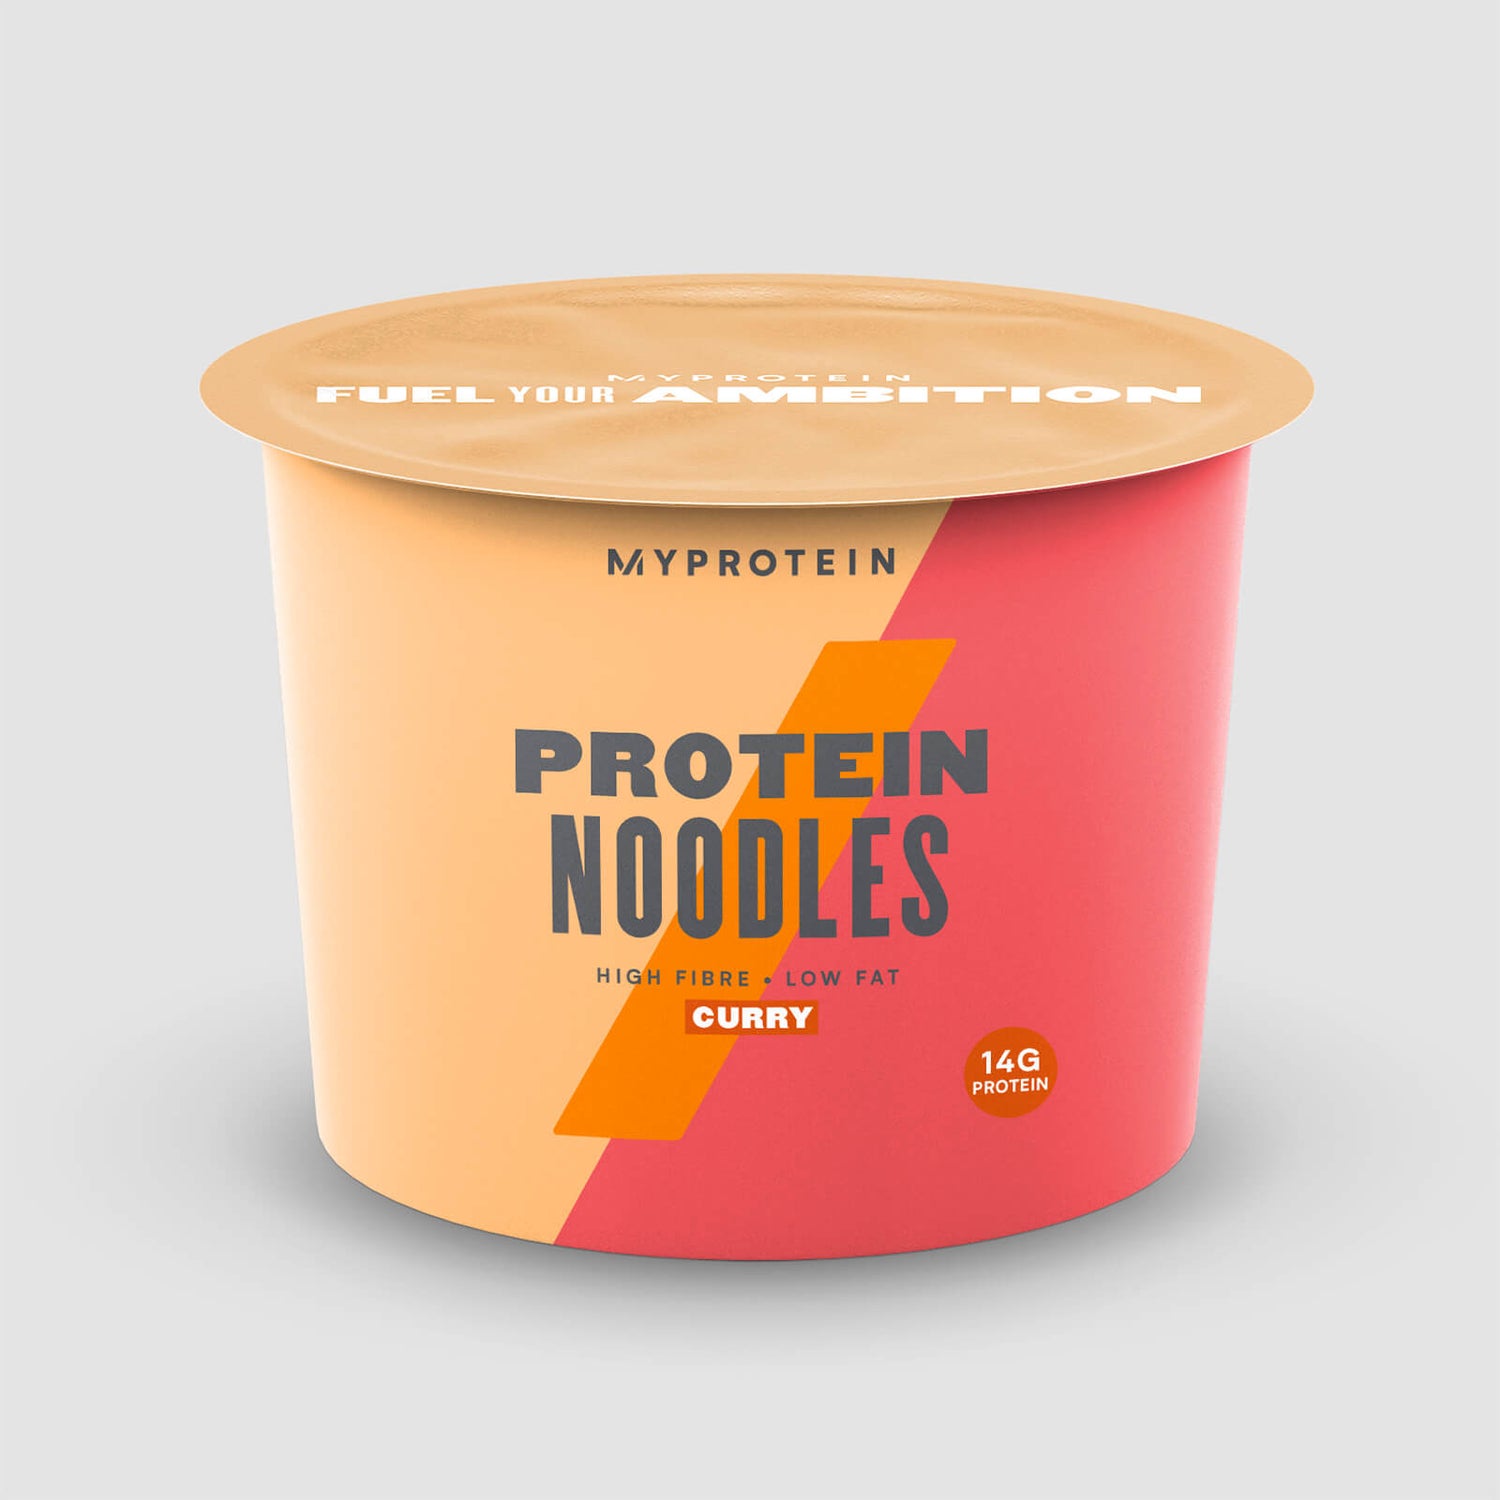 Proteinske Nudle - 6 x 68g - Curry